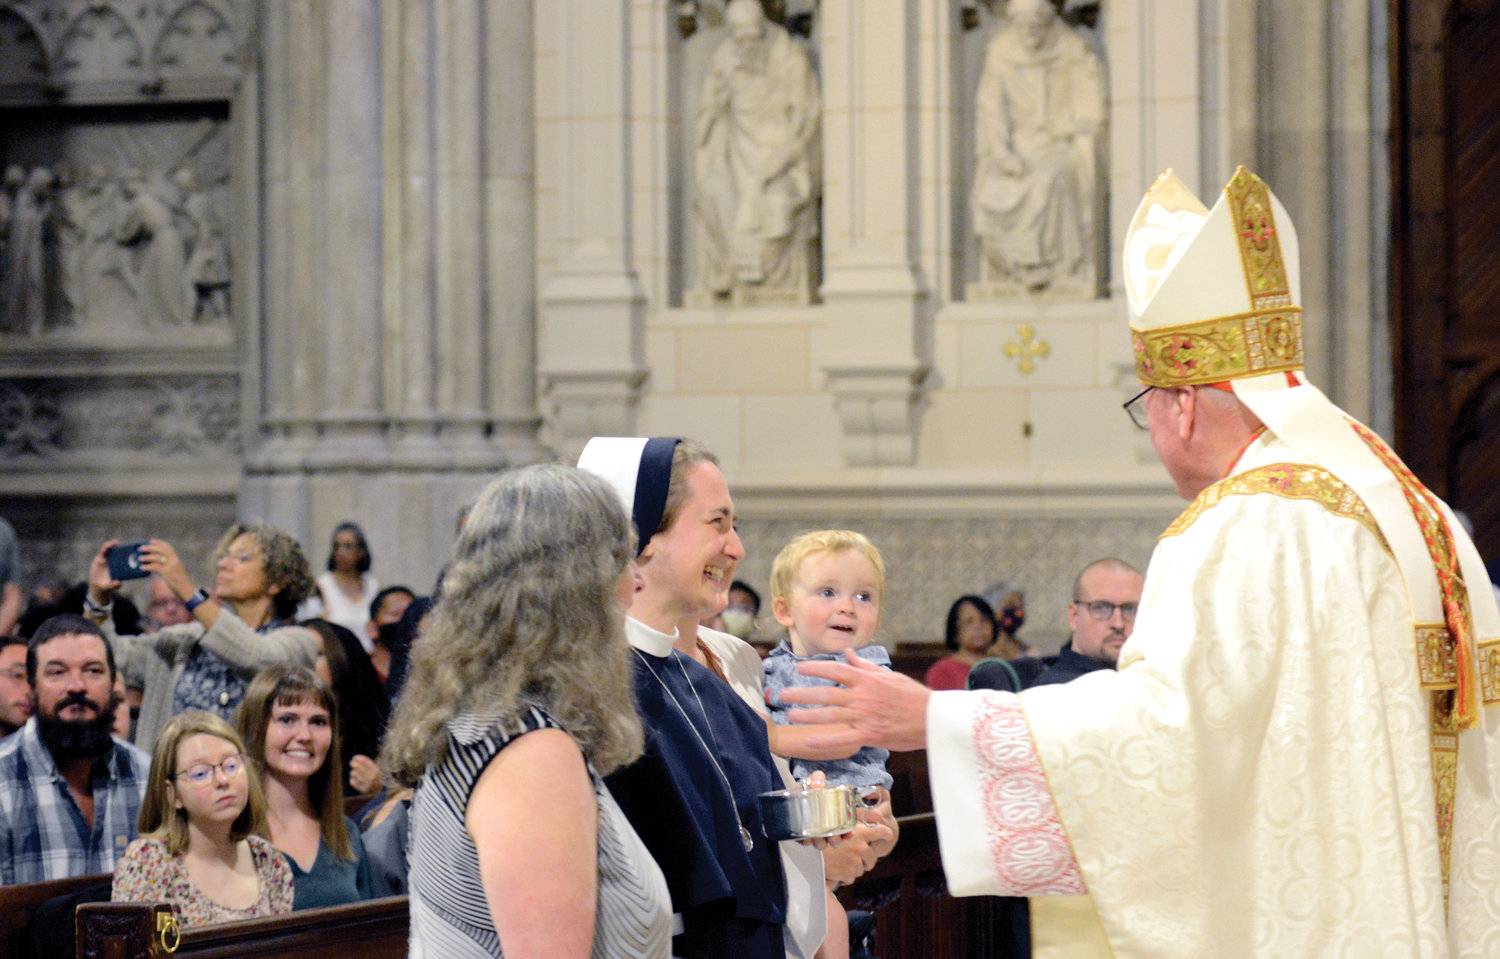 Cardinal Dolan celebrated Mass as six Sisters of Life made their final vows at St. Patrick’s Cathedral Aug. 6. The cardinal accepts offertory gifts from Sister Cara Marie, S.V., and her family members.